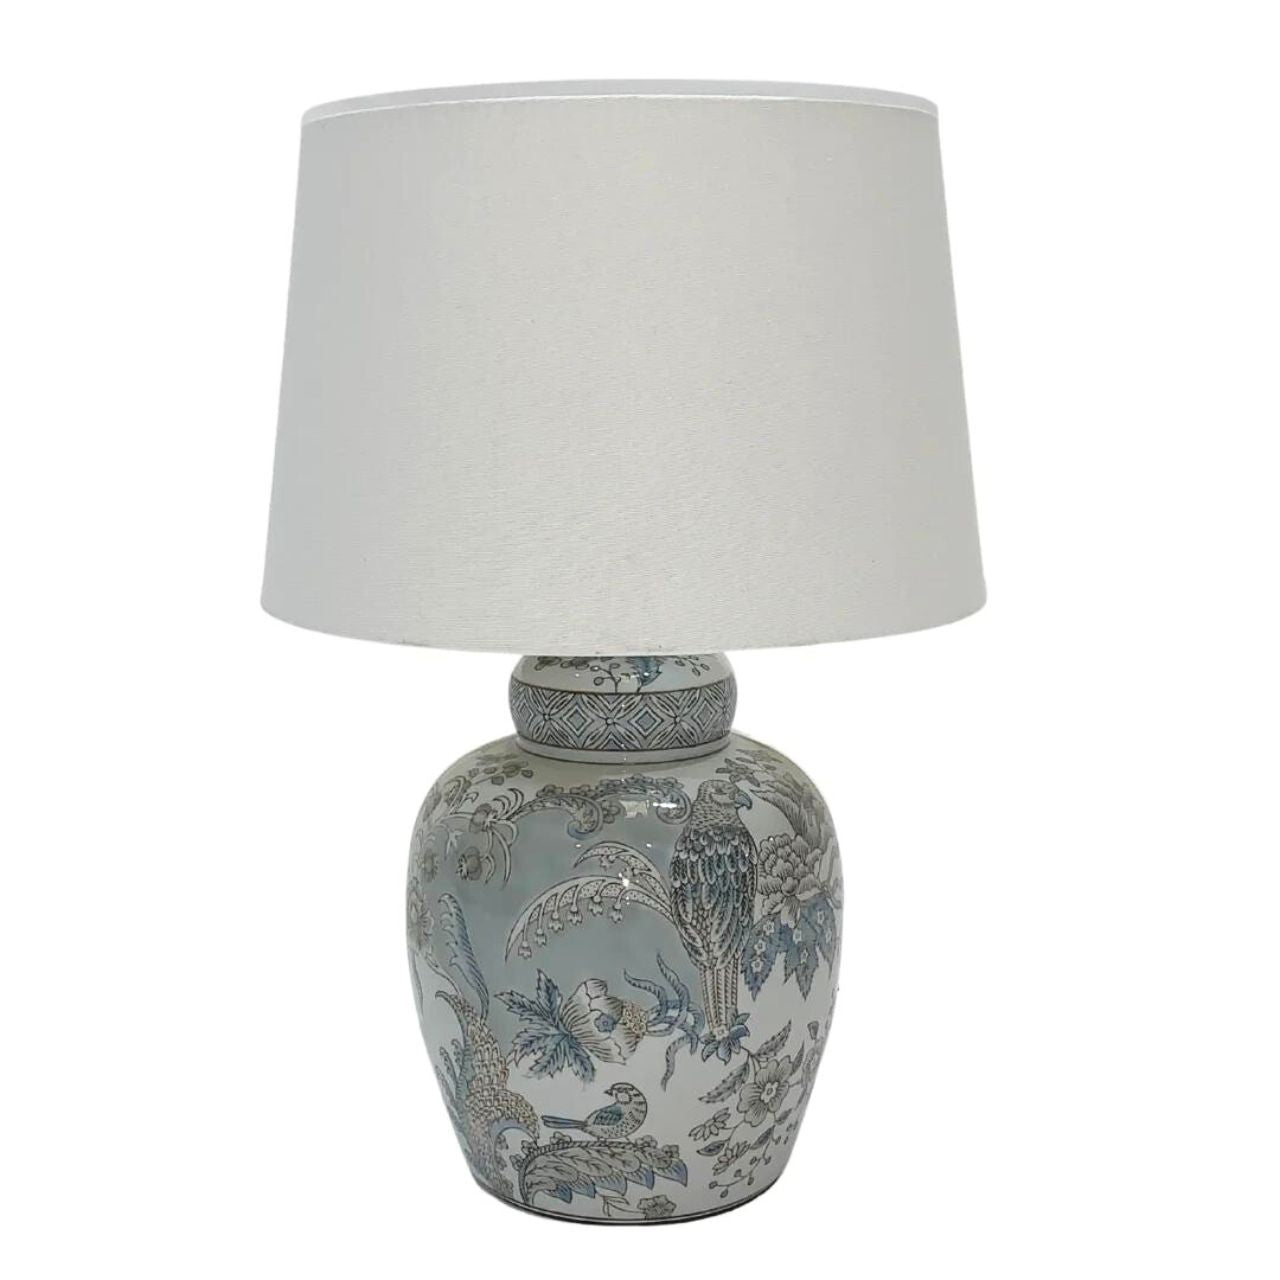 Mindy Brownes Delia Lamp Small  Good lighting is essential for every home. Our ceramic collection is traditional yet timeless and featuring stunning designs, prints and patterns bursting with colour. This lamp in light blue and grey in colour. Tropical print design. A white linen shade.